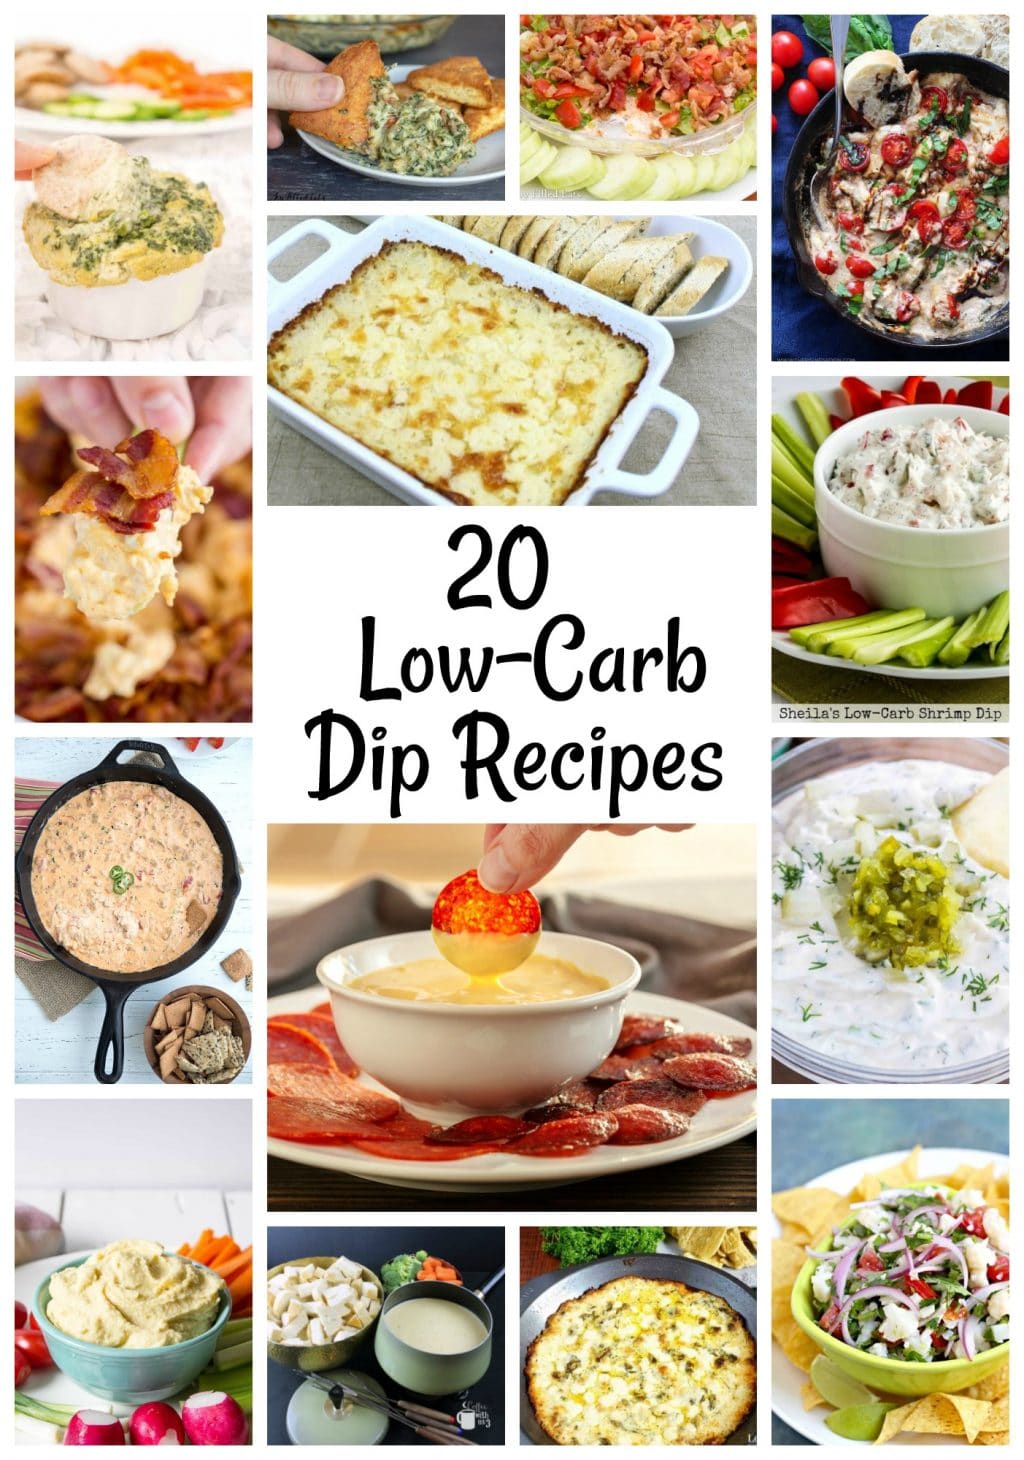 Recipes for 20 delicious, low-carb dips (most are keto friendly!) that are perfect for game day or any get together!